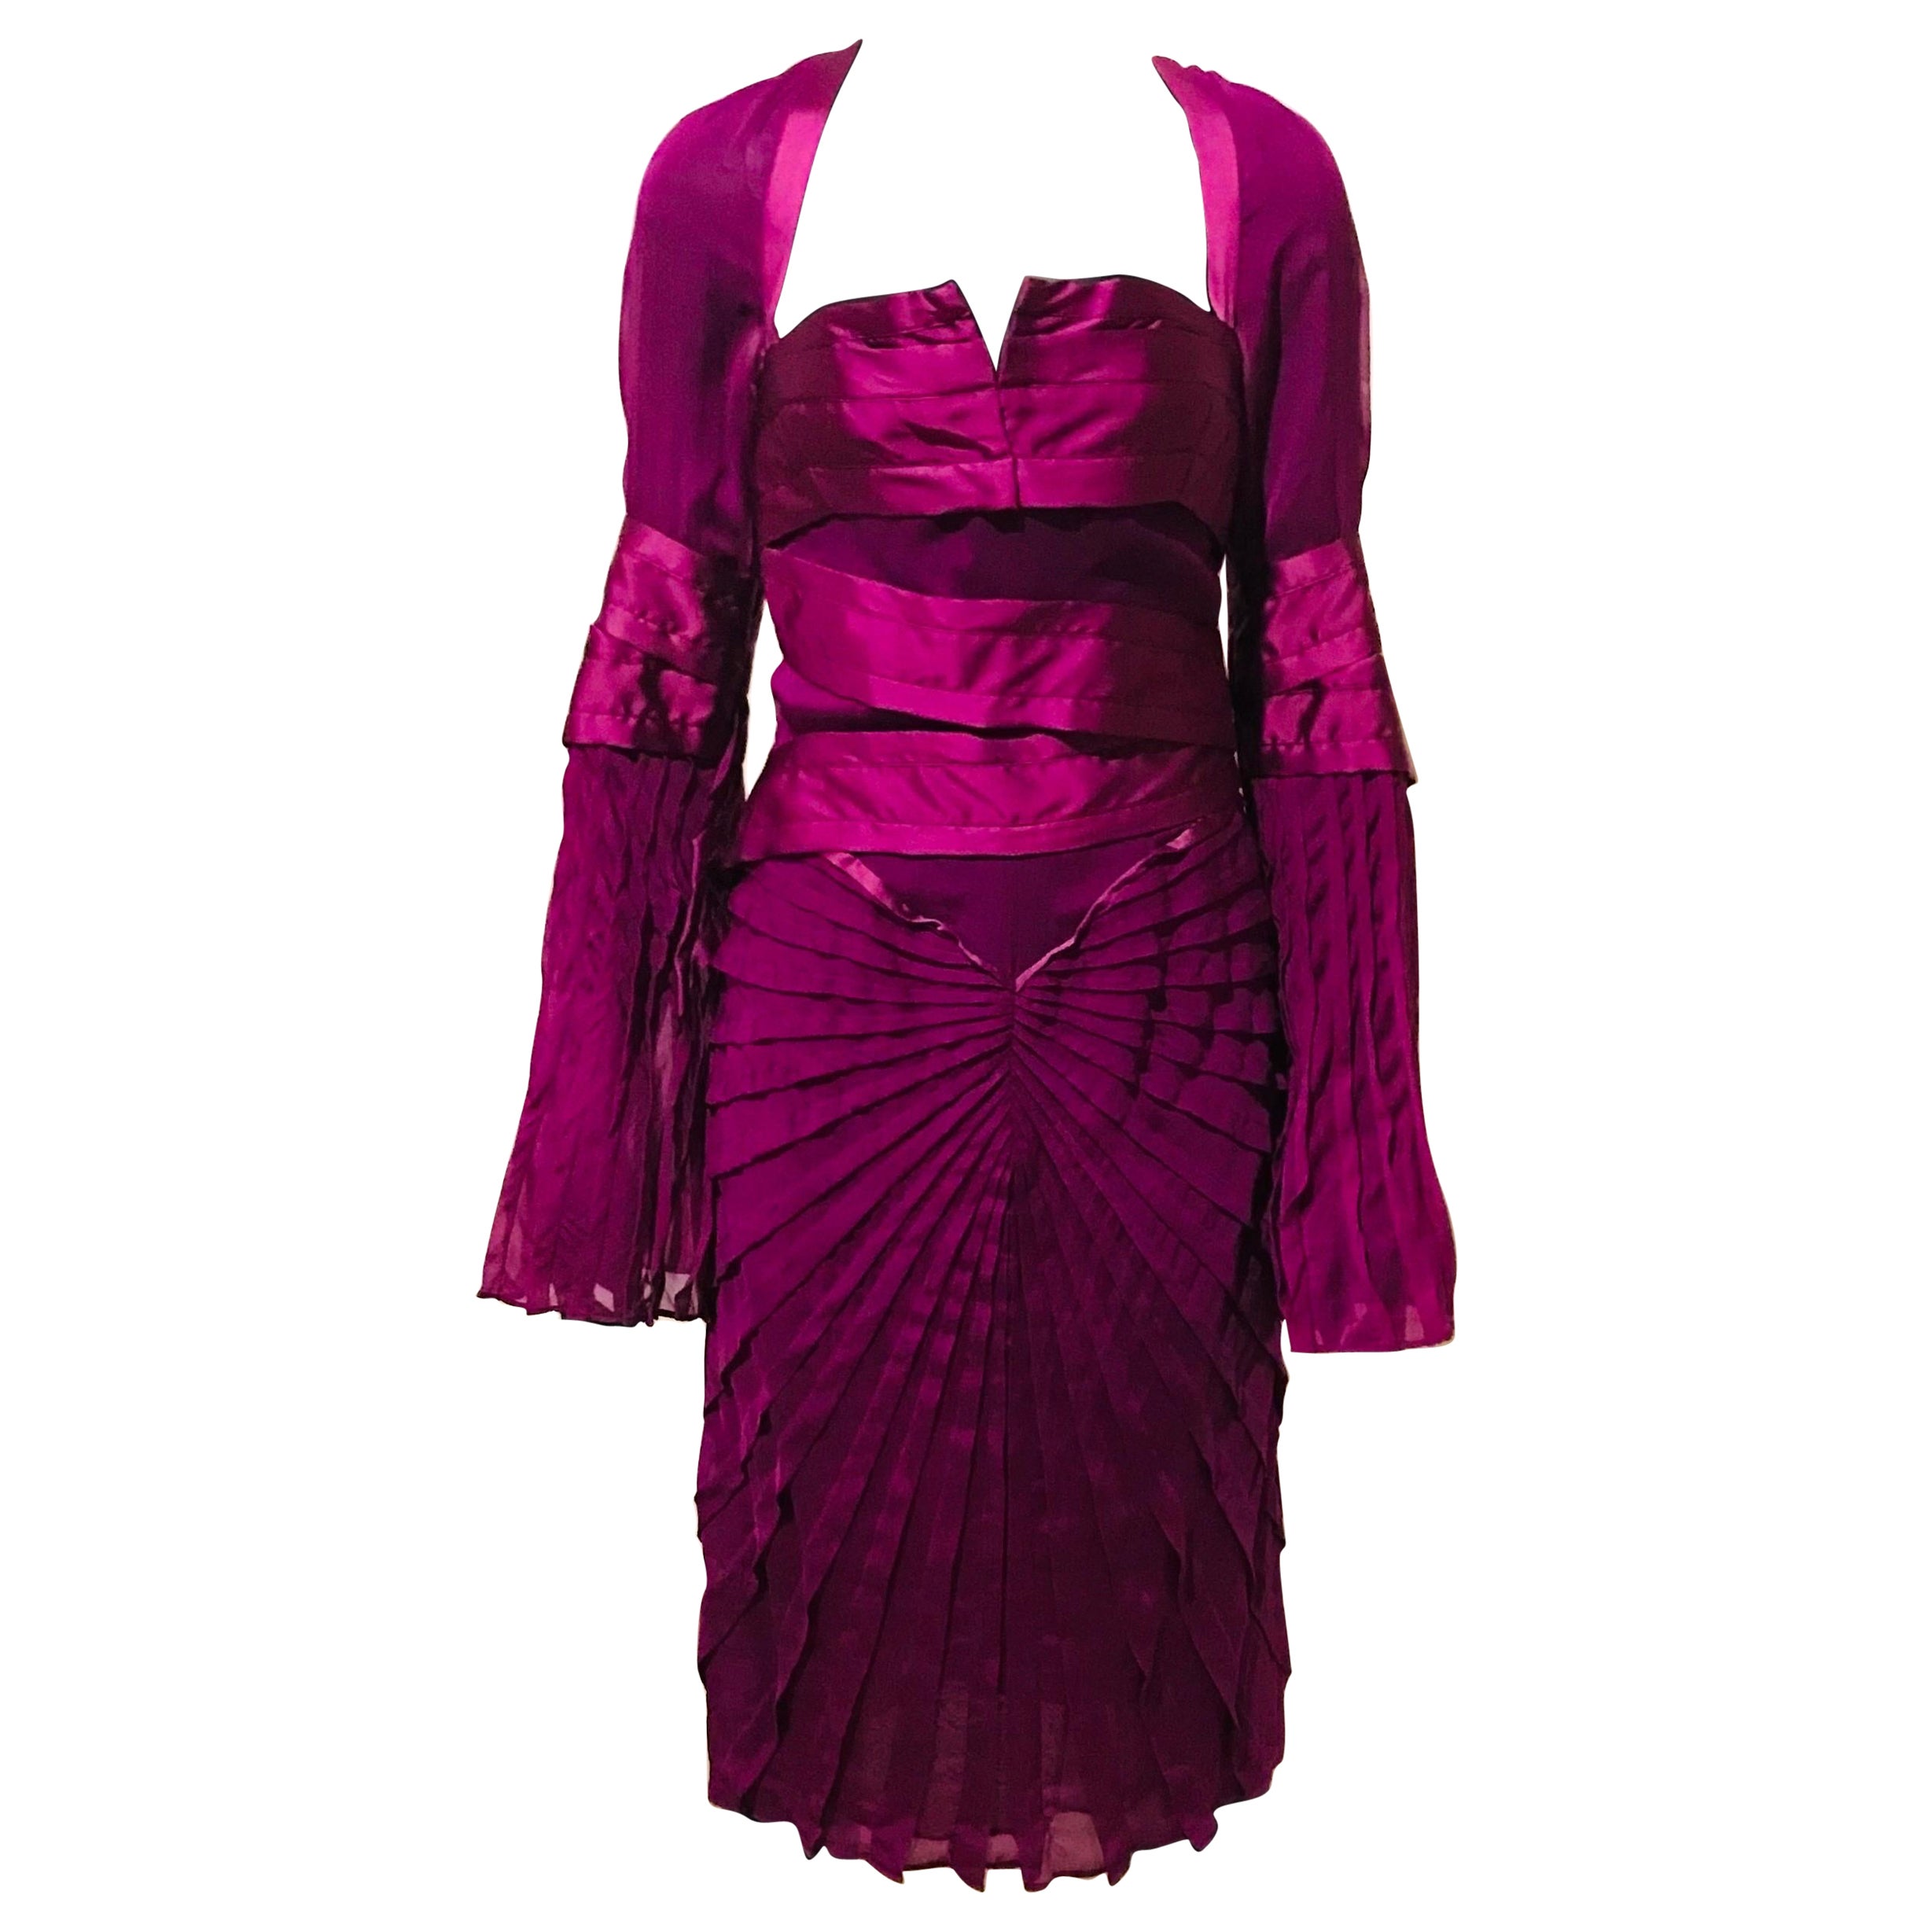 Final collection F/W look #27 Tom Ford for GUCCI magenta silk dress For Sale